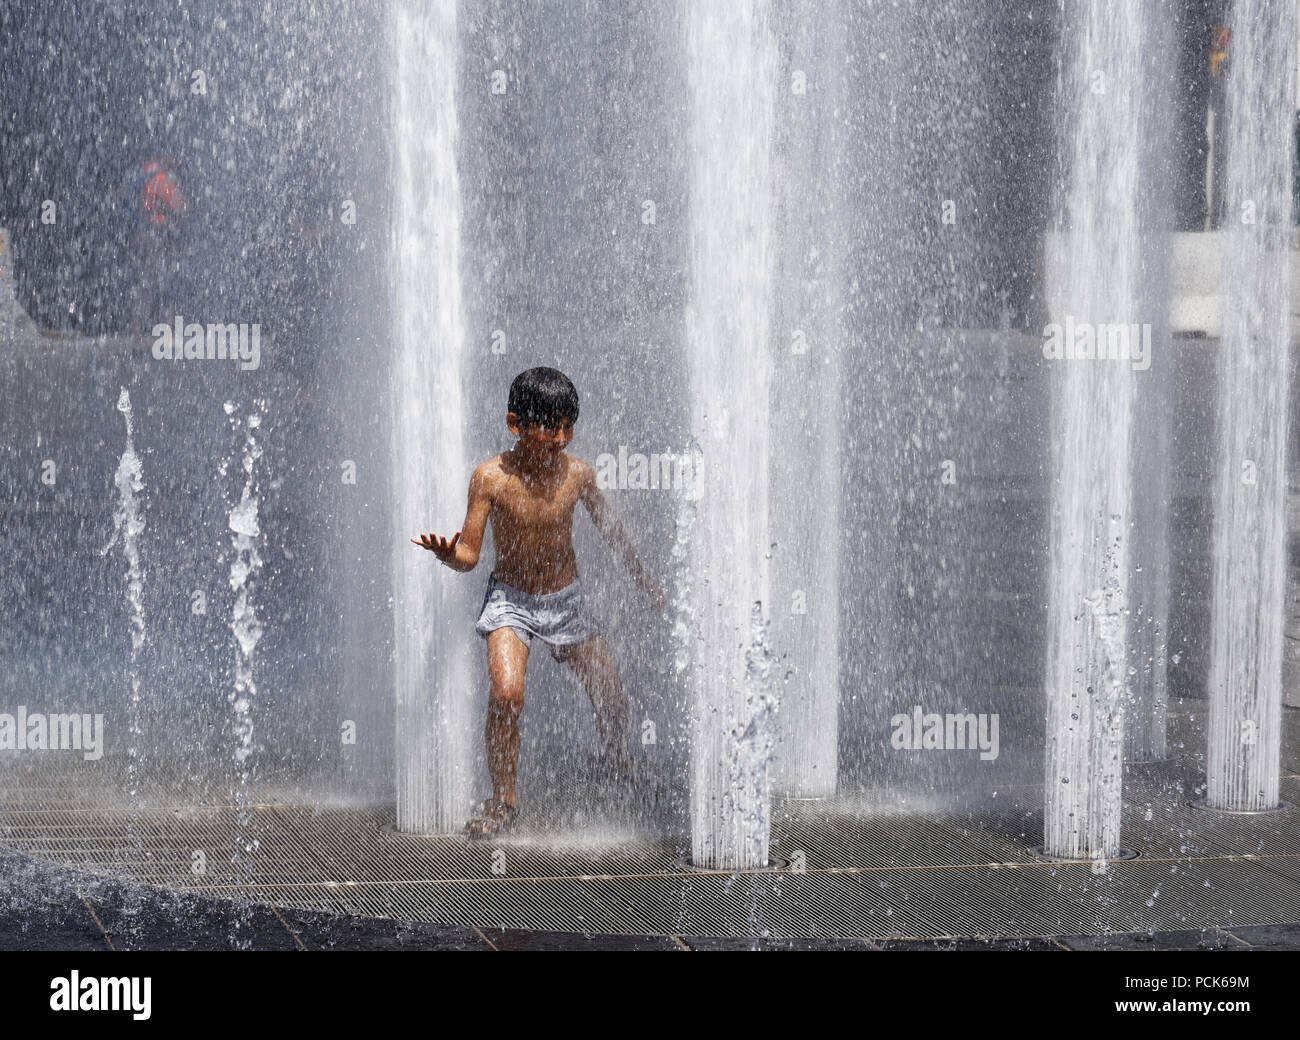 Children cooling off playing in water fountains in on Rue Jeanne Mance in Montreals Entertainment District. Taken during the 2108 heatwave. Stock Photo